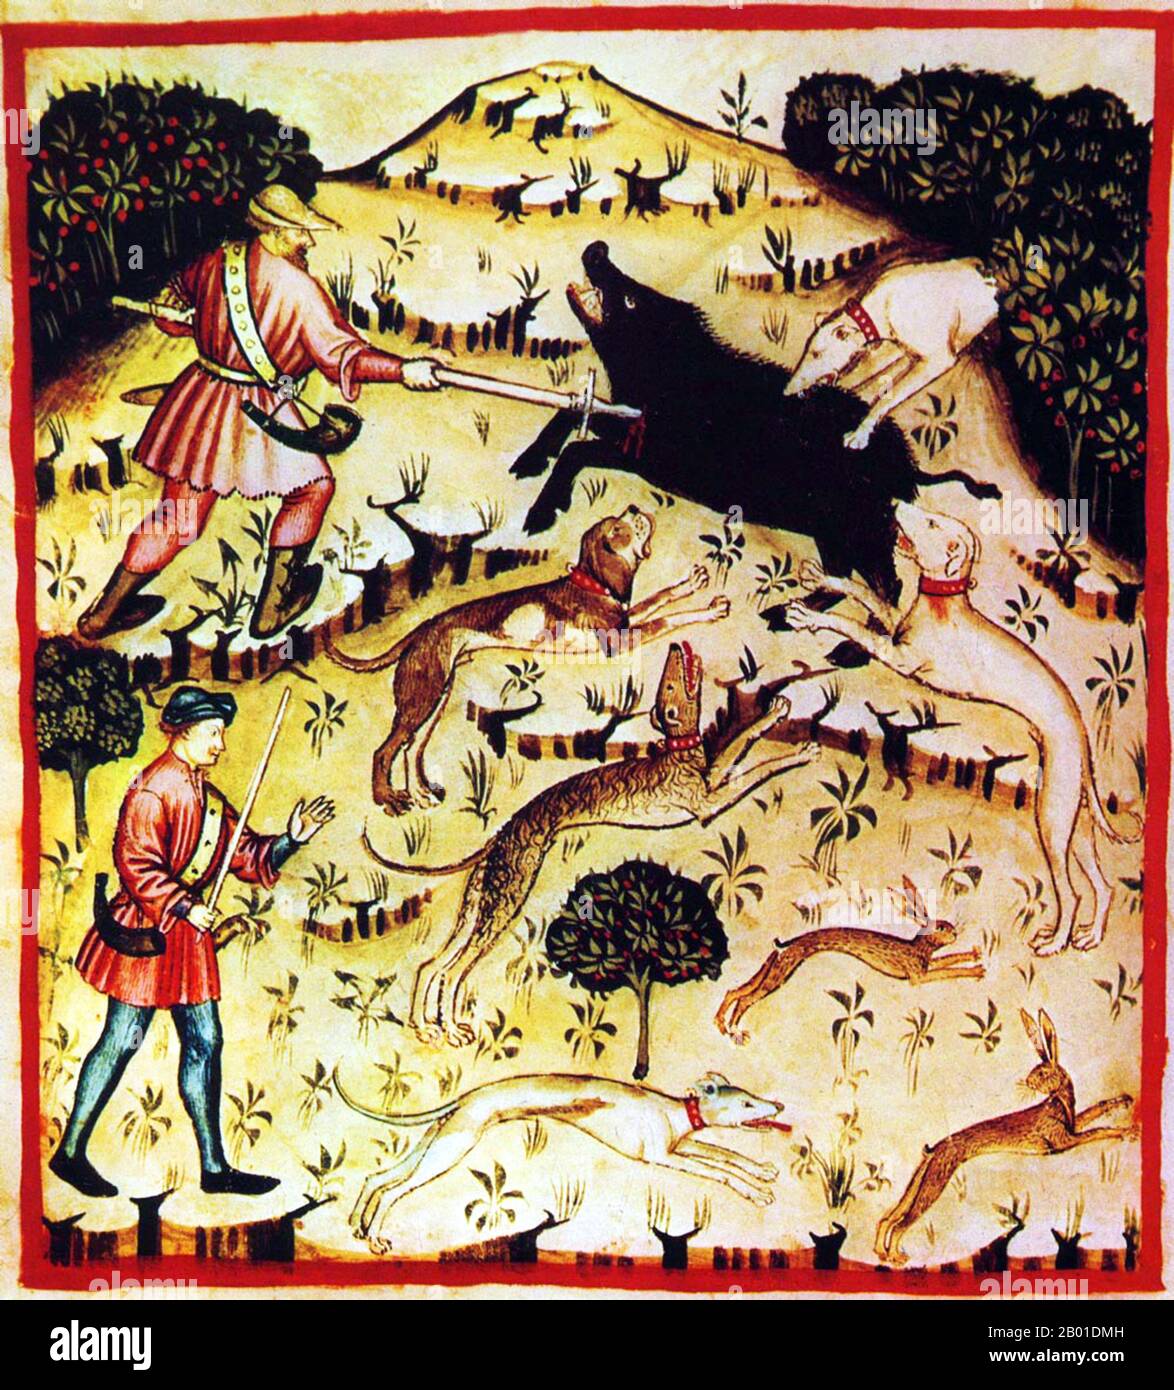 Iraq/Italy: Hunting wild boar and hare with dogs and spear. Illustration from Ibn Butlan's Taqwim al-sihha or 'Maintenance of Health', published in Italy as the Tacuinum Sanitatis, 14th century.  The Tacuinum (sometimes Taccuinum) Sanitatis is a medieval handbook on health and wellbeing, based on the Taqwim al‑sihha, an eleventh-century Arab medical treatise by Ibn Butlan of Baghdad.  Ibn Butlân was a Christian physician born in Baghdad and who died in 1068.  He set forth six elements necessary to maintain daily health. Stock Photo